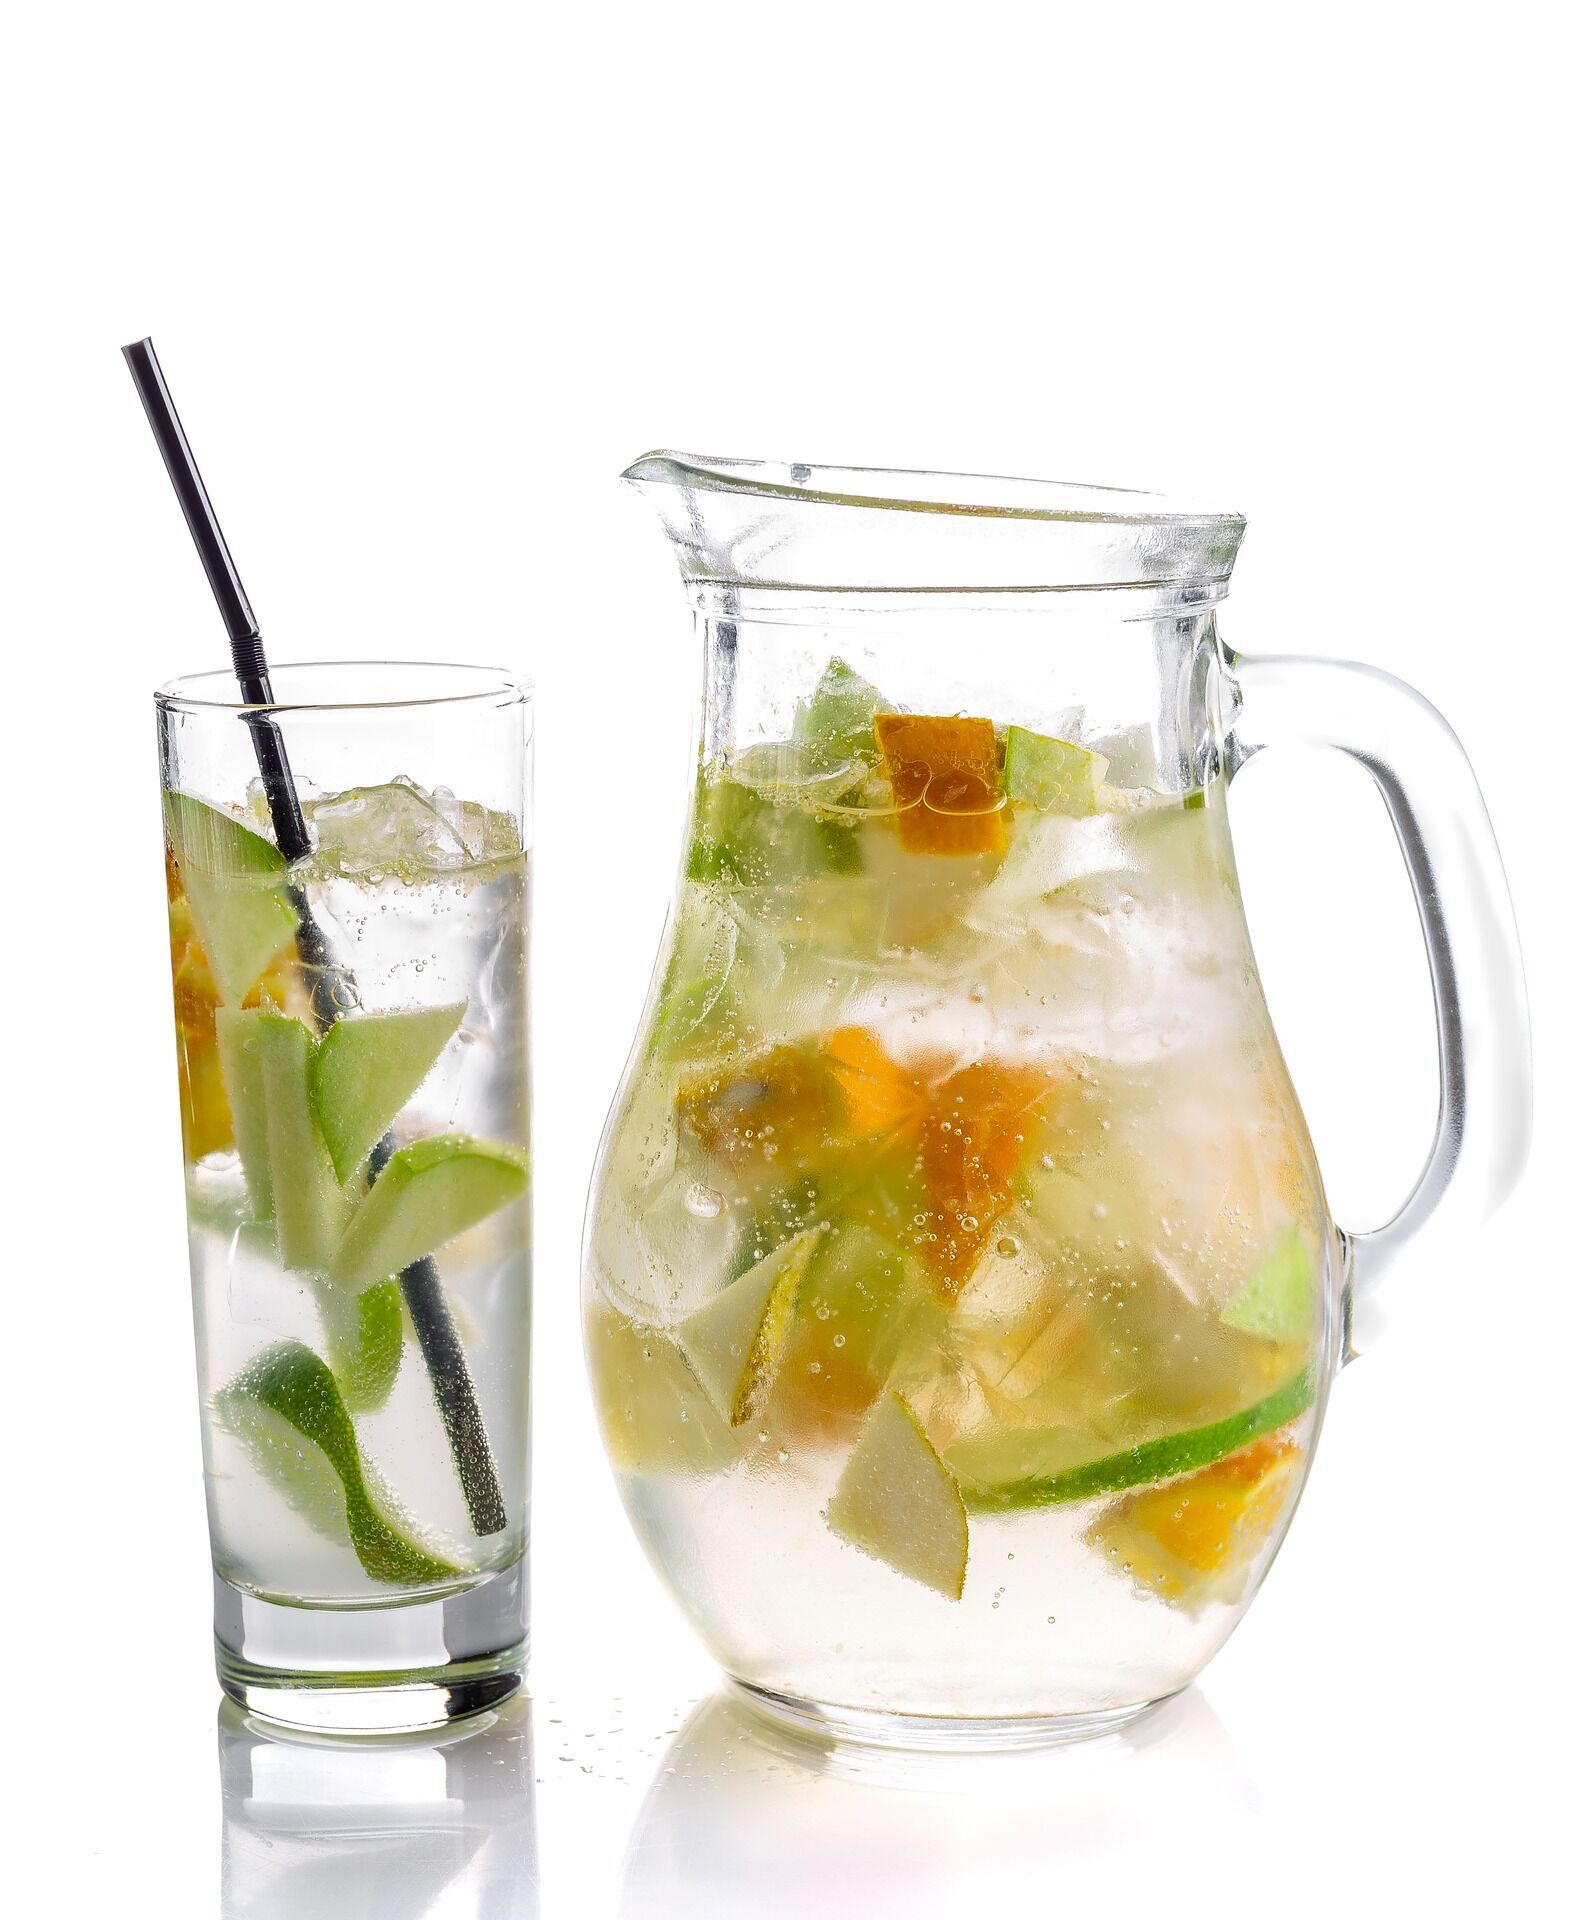 Water with cucumber and citrus